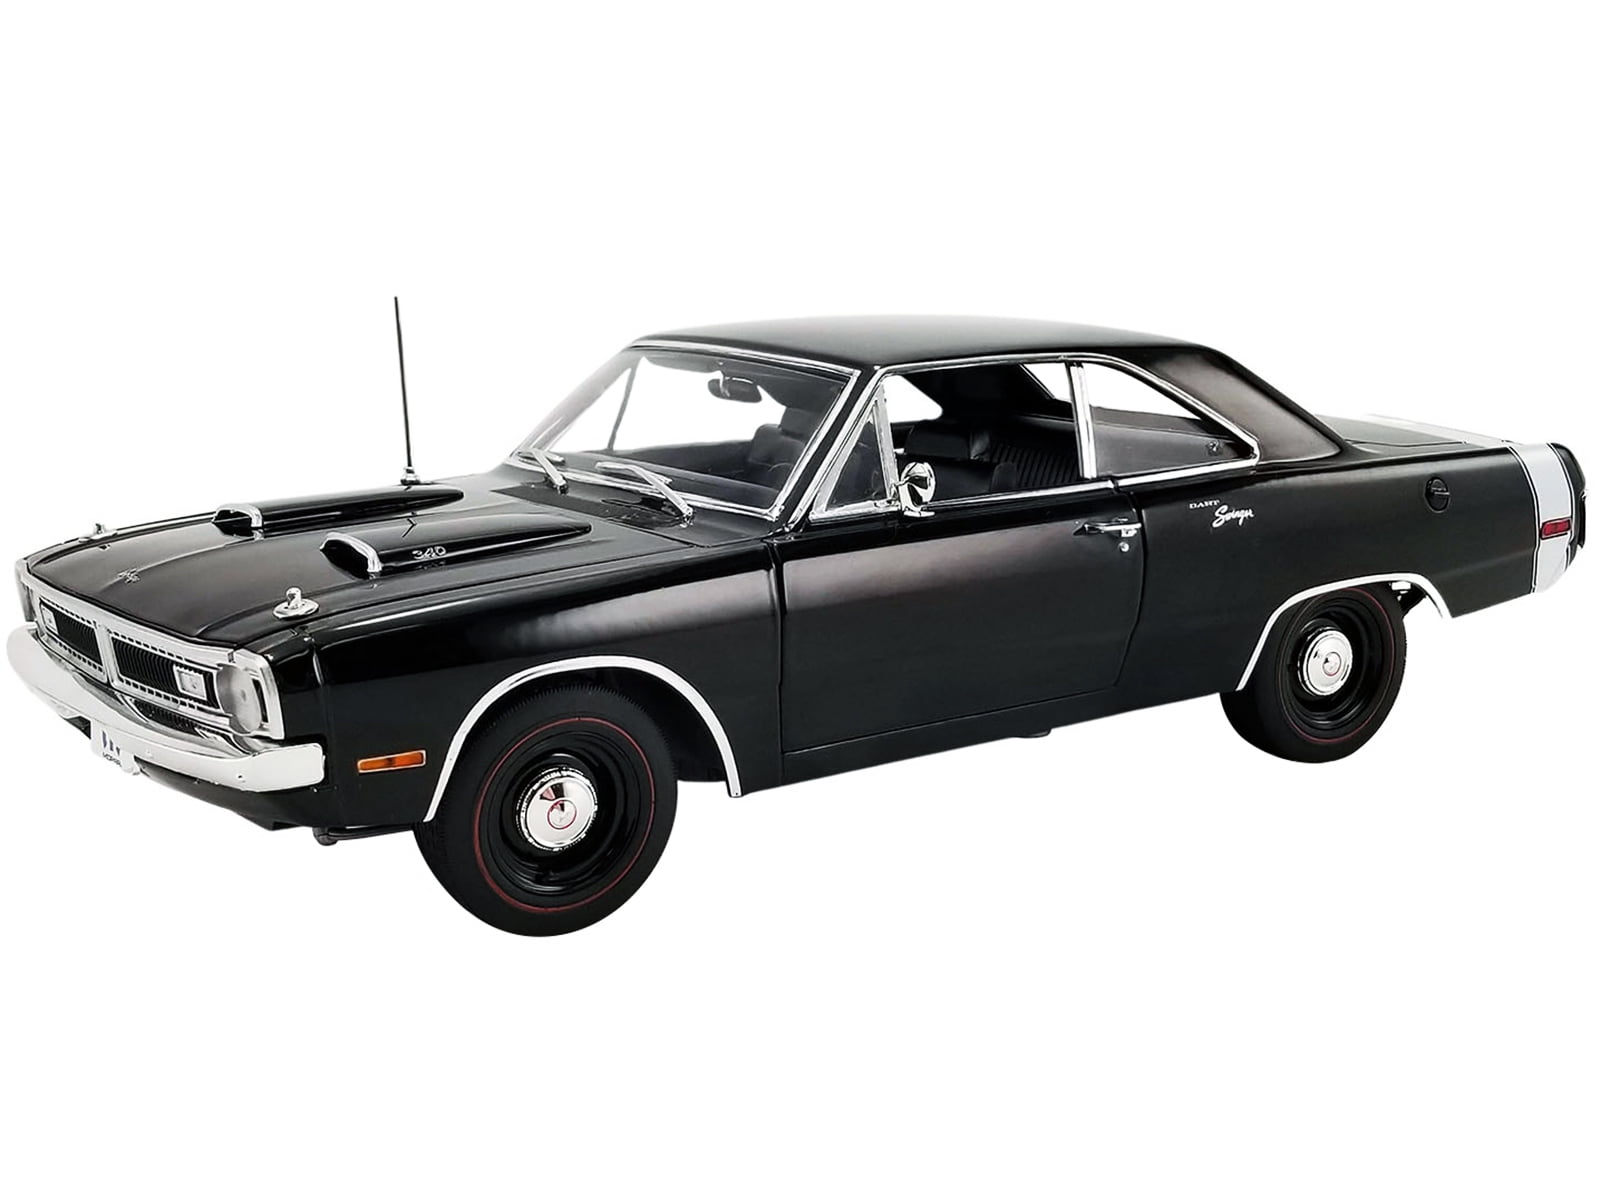 1970 Dodge Dart Swinger 340 Black with White Tail Stripe Limited Edition to  738 pieces Worldwide 1/18 Diecast Model Car by ACME